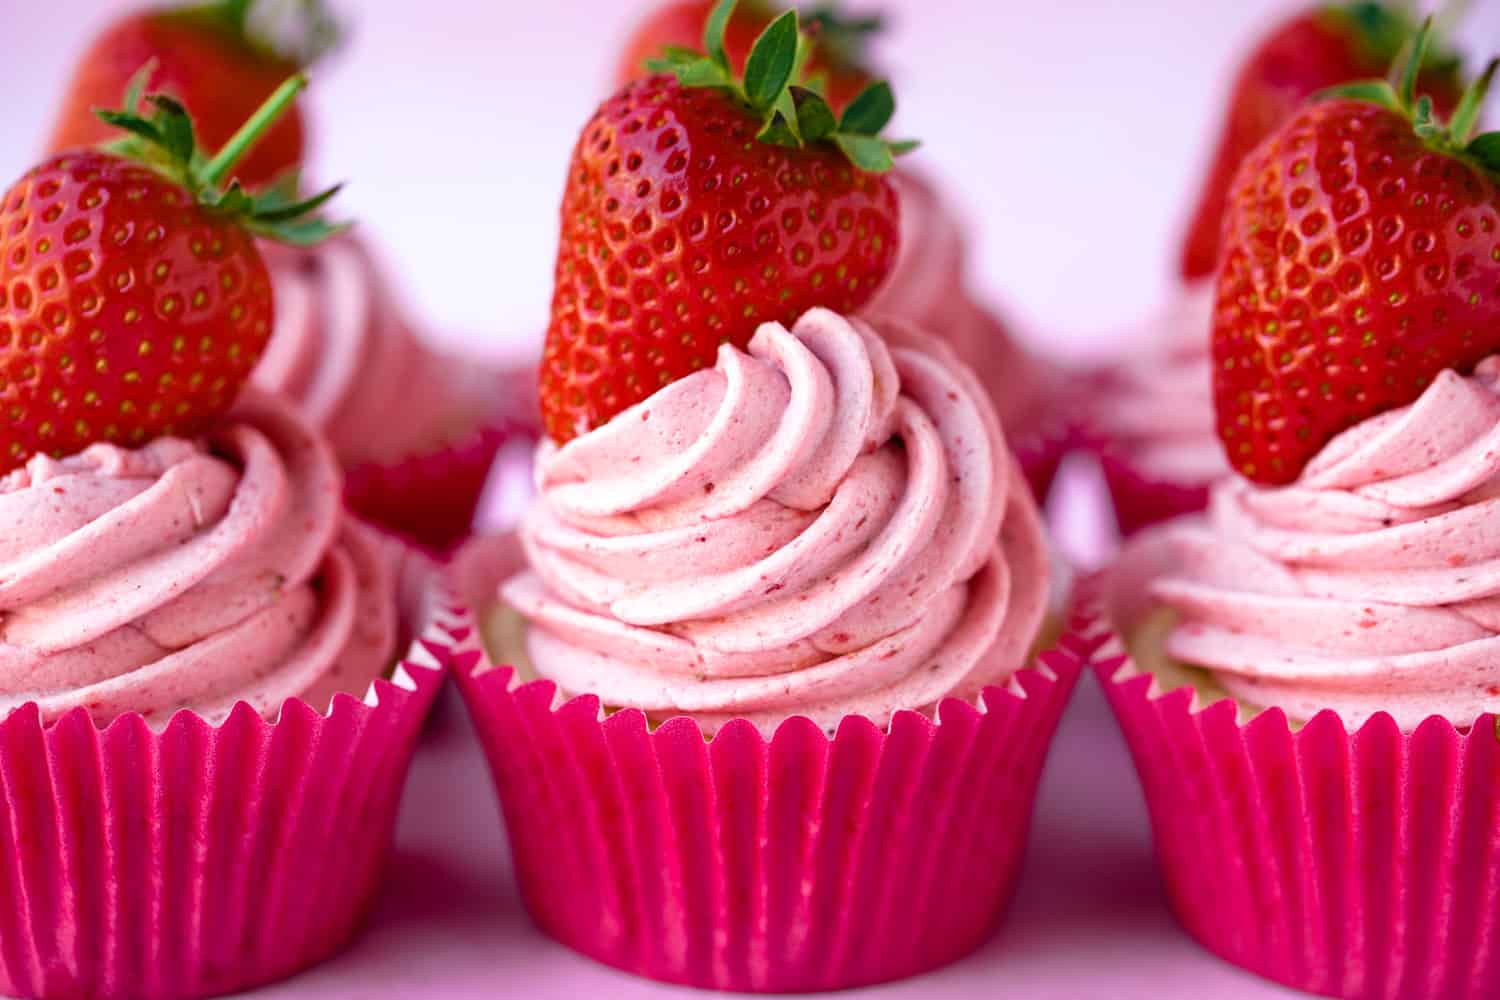 A row of pink strawberry cupcakes in pink cases topped with fresh strawberries